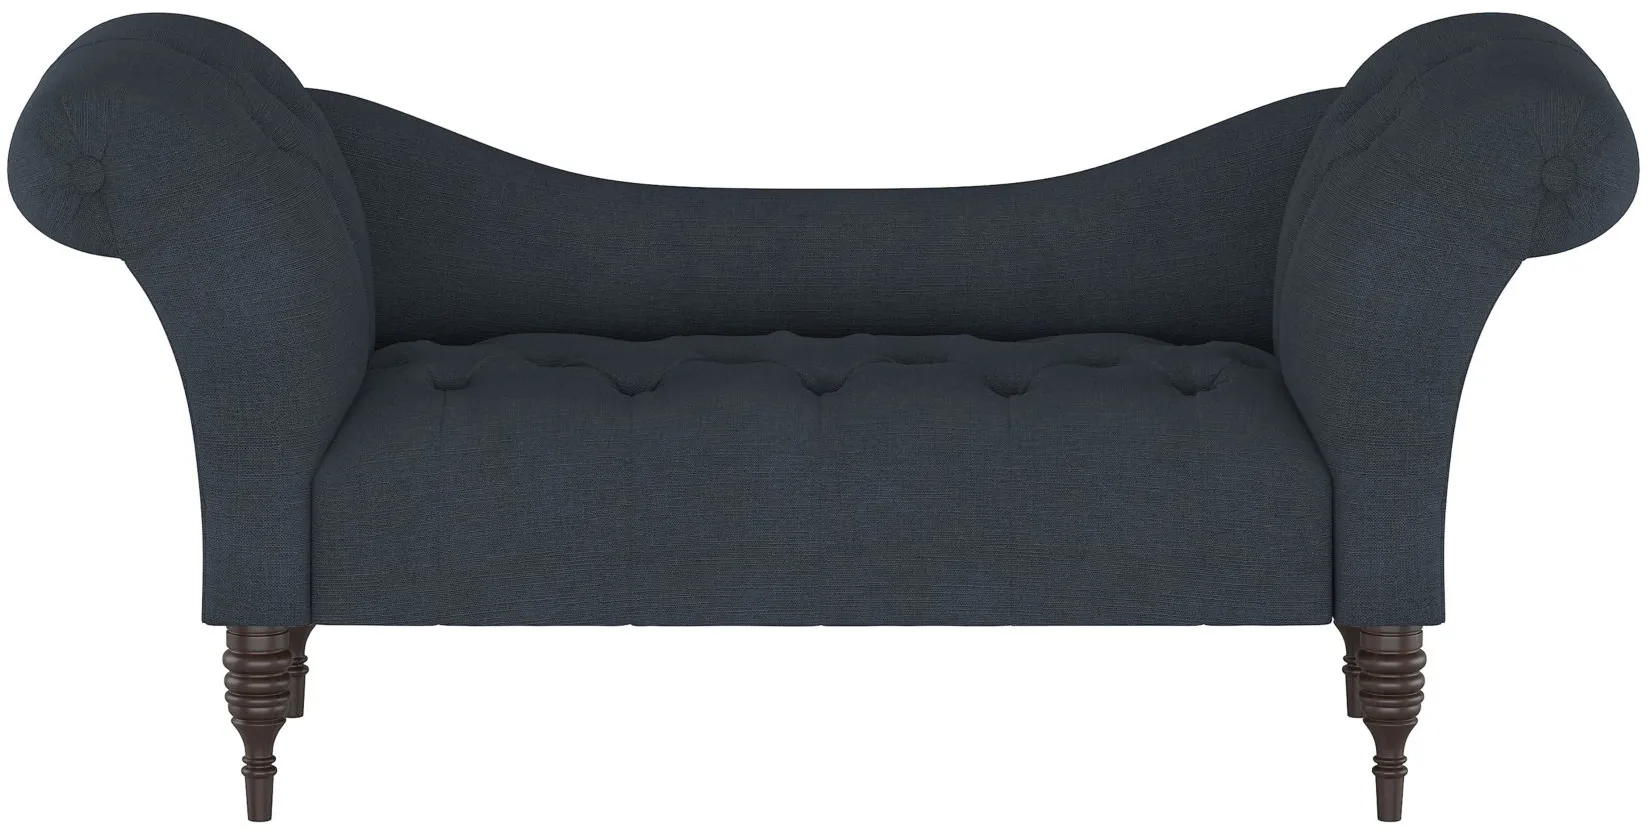 Lansing Chaise Lounge in Linen Navy by Skyline